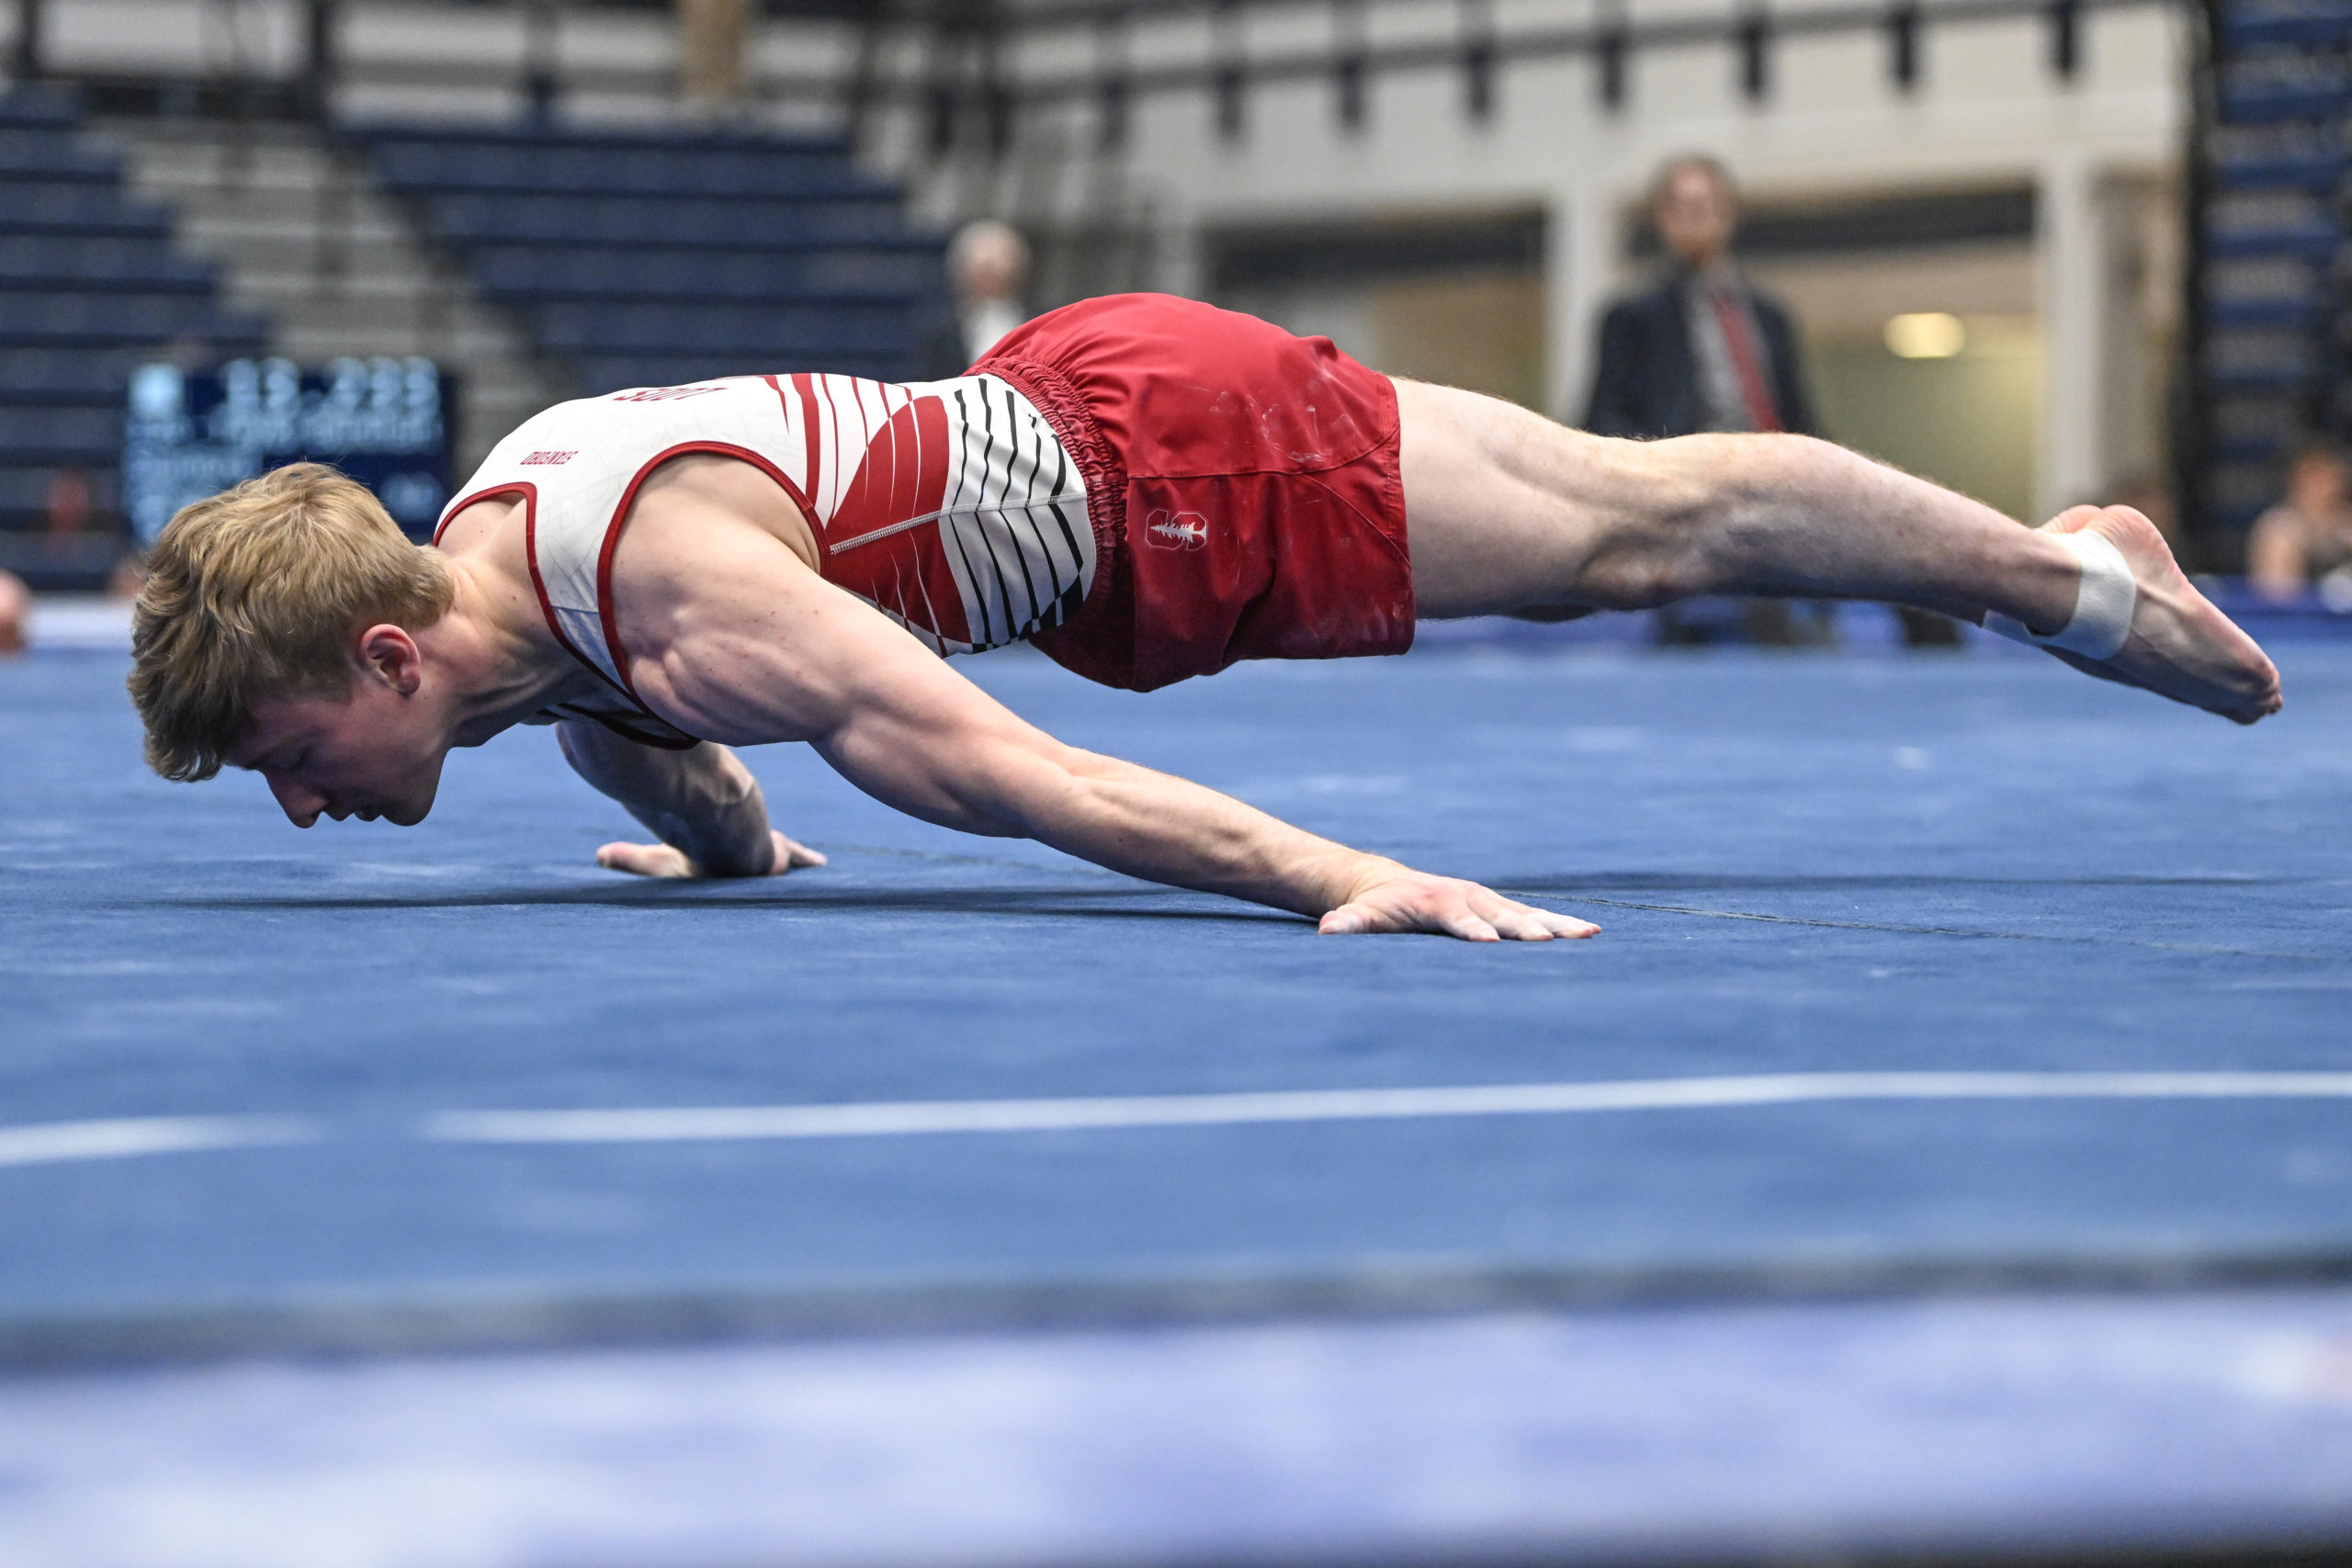 Stanford's Riley Loos performs a Maltese on floor during session 1 of pre-qualifying at the 2023 NCAA Men's Gymnastics Championships.